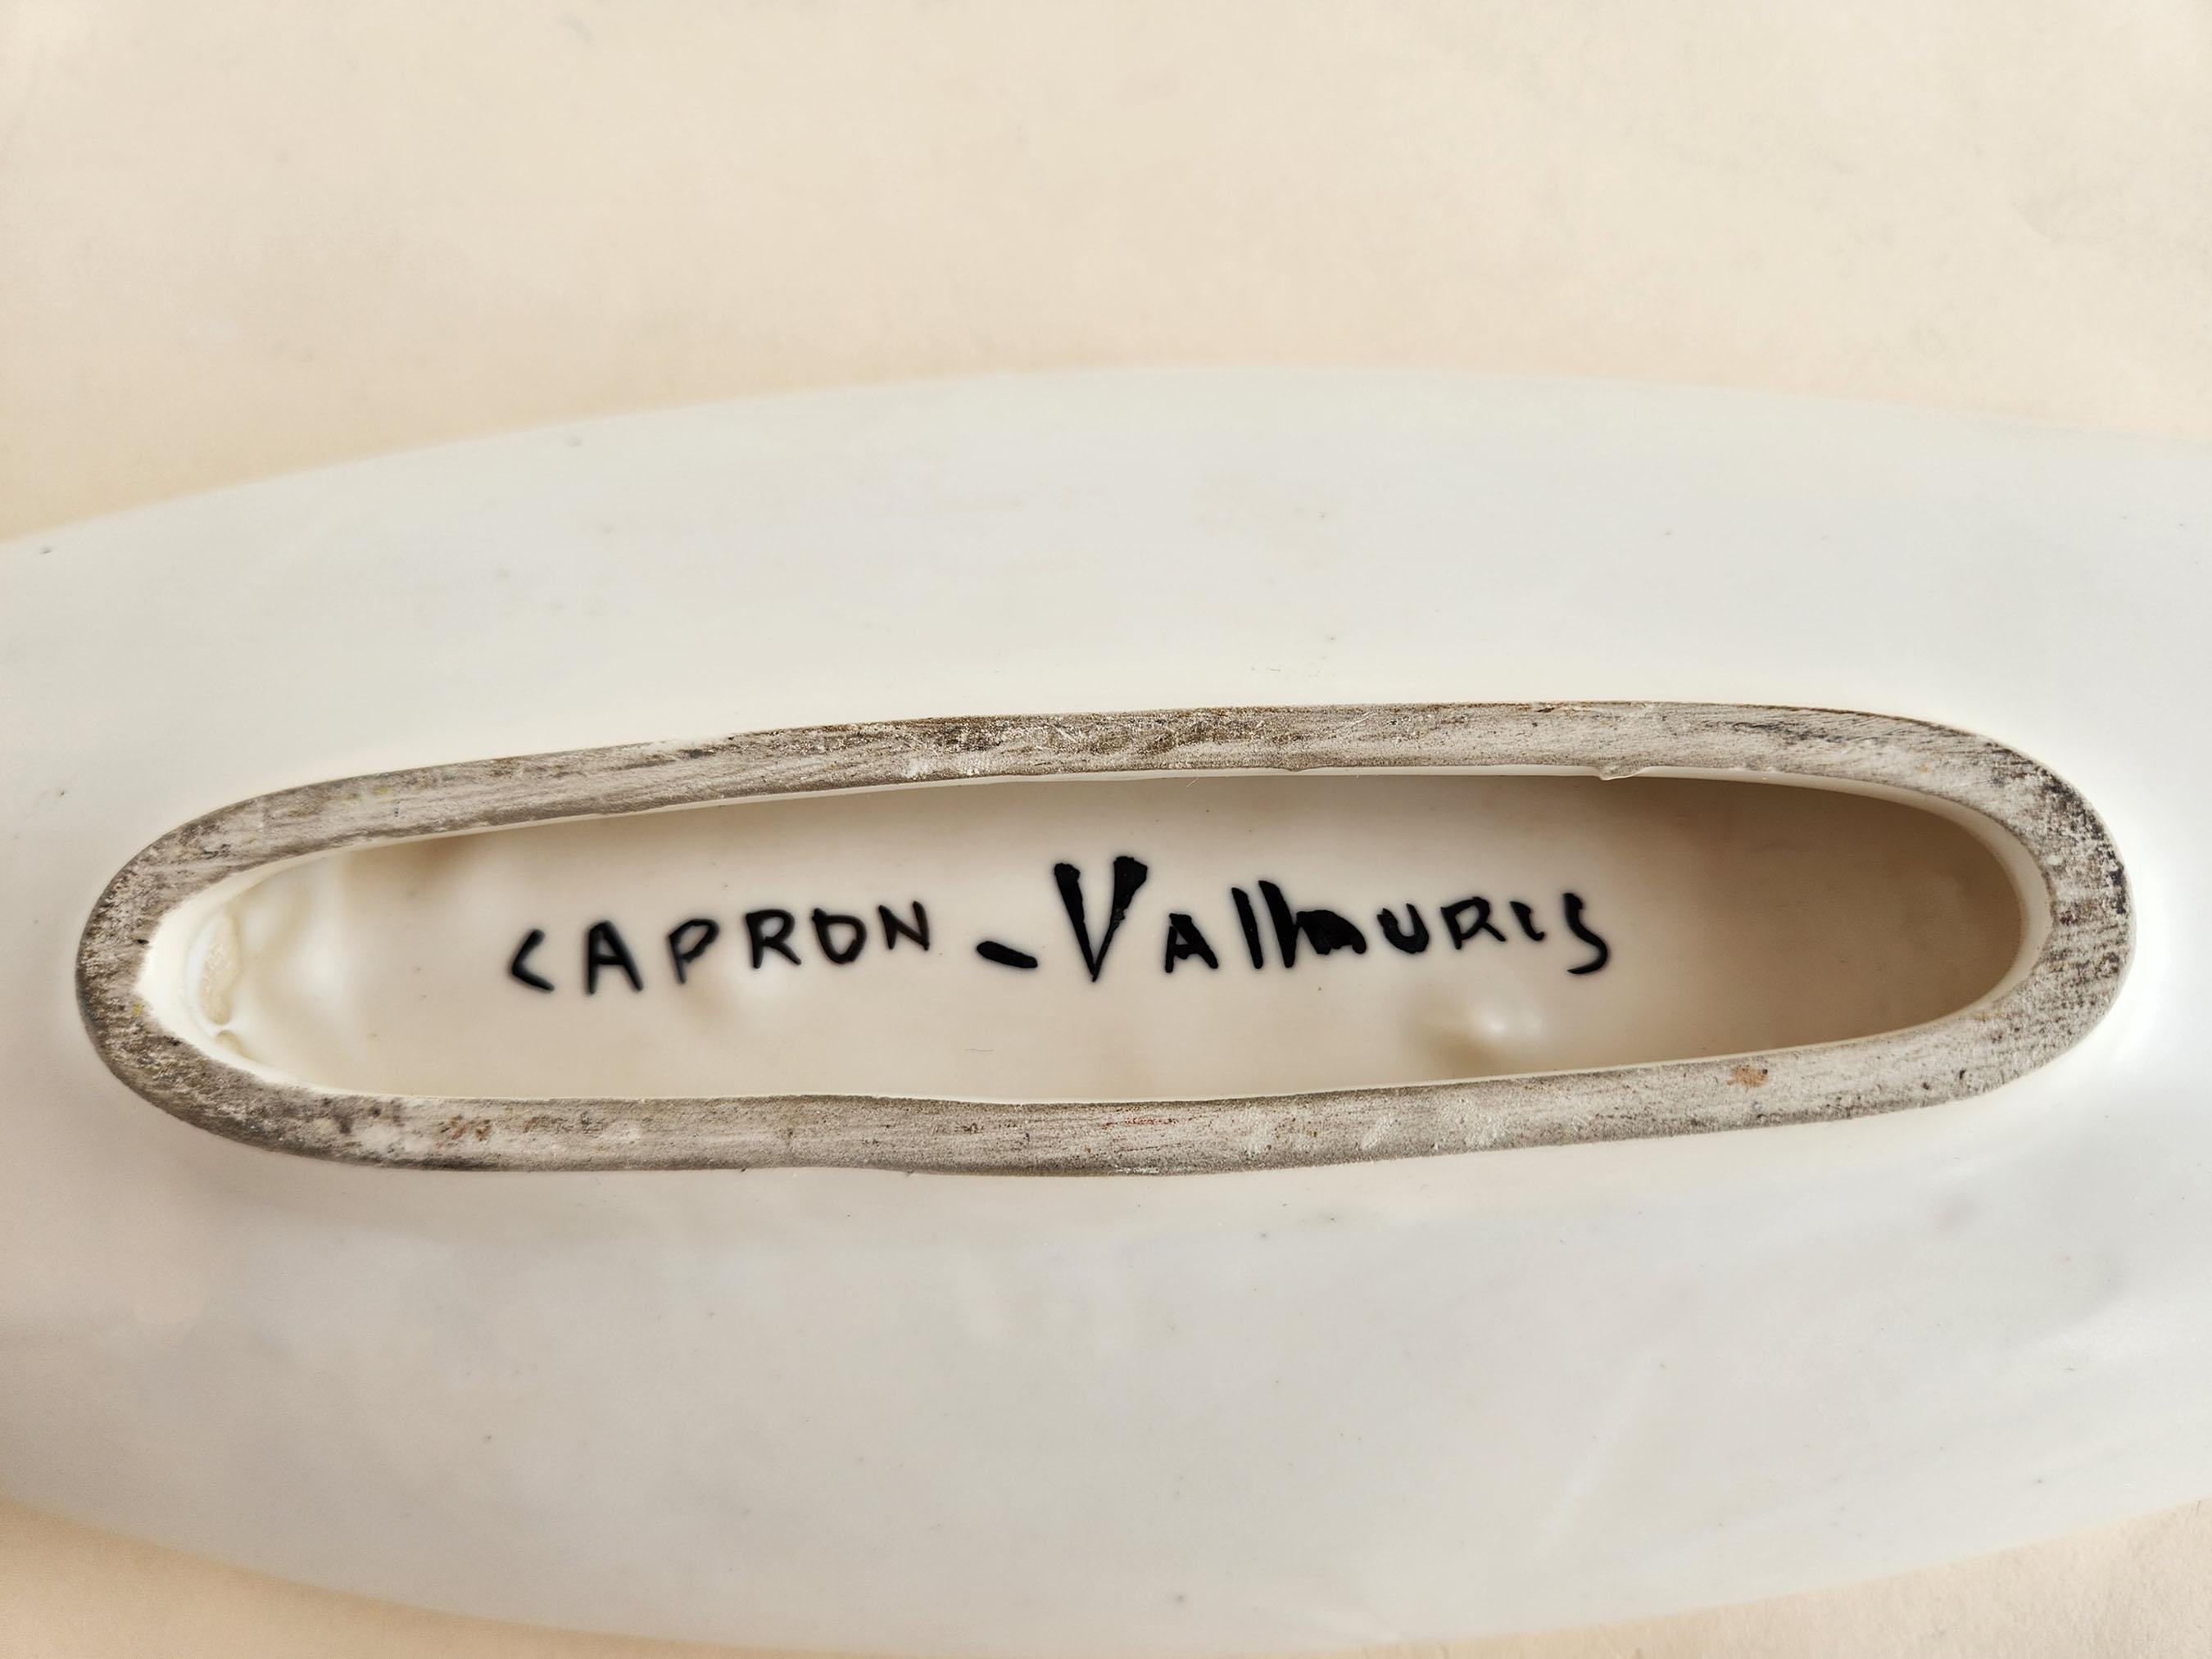 Roger Capron - Ceramic Canoe Dish with Abstract Design For Sale 3